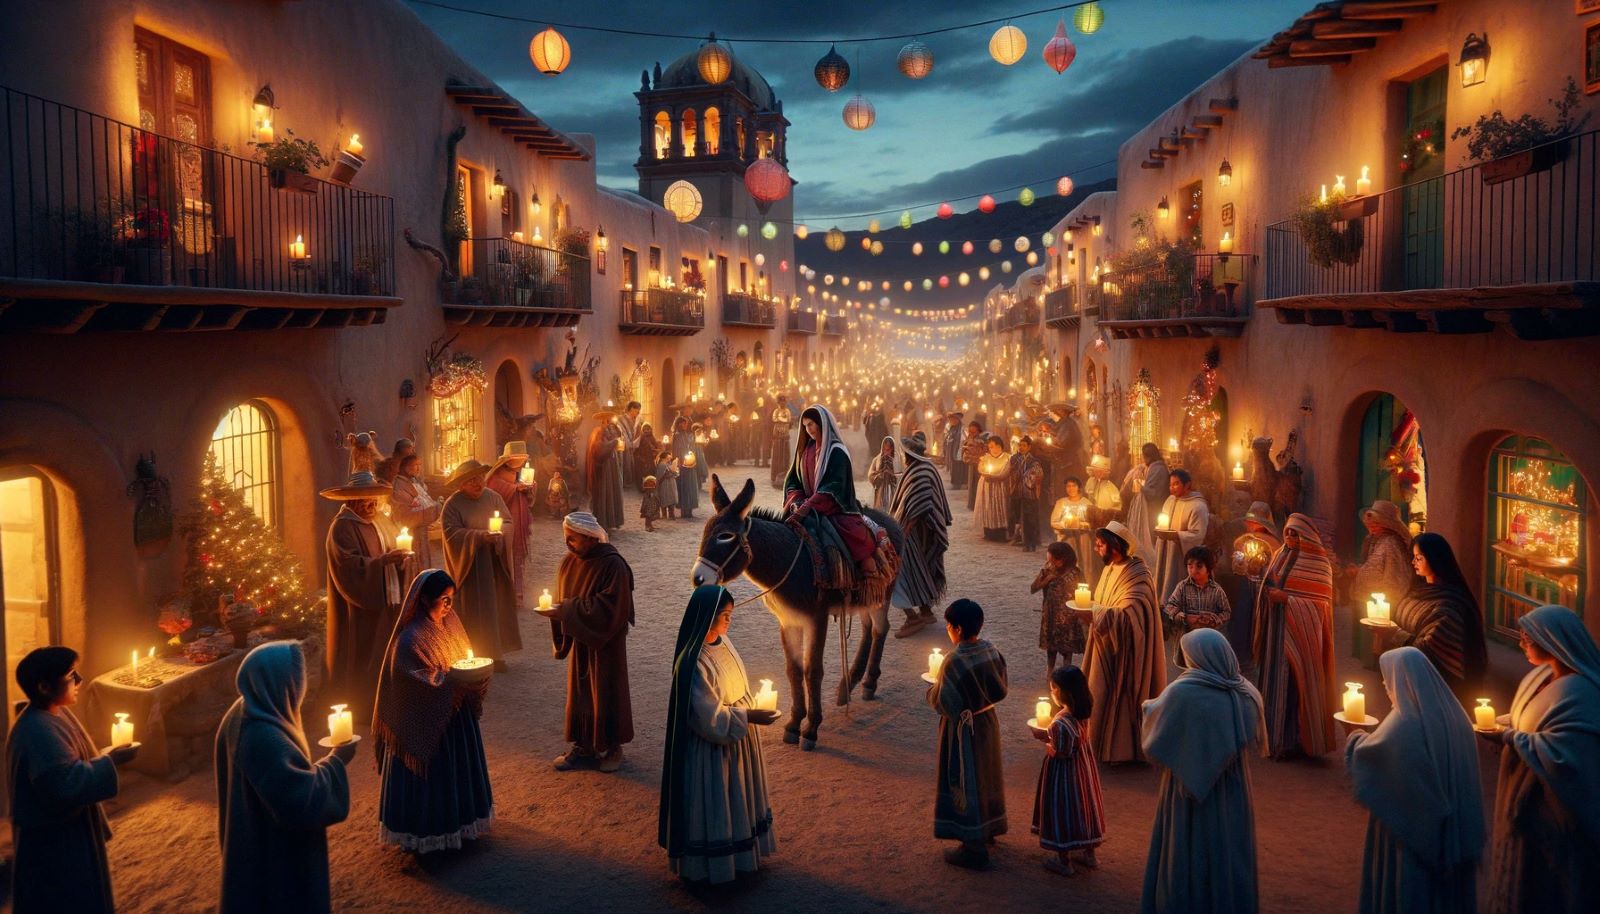 What Does Las Posadas Commemorate During The Advent Season?